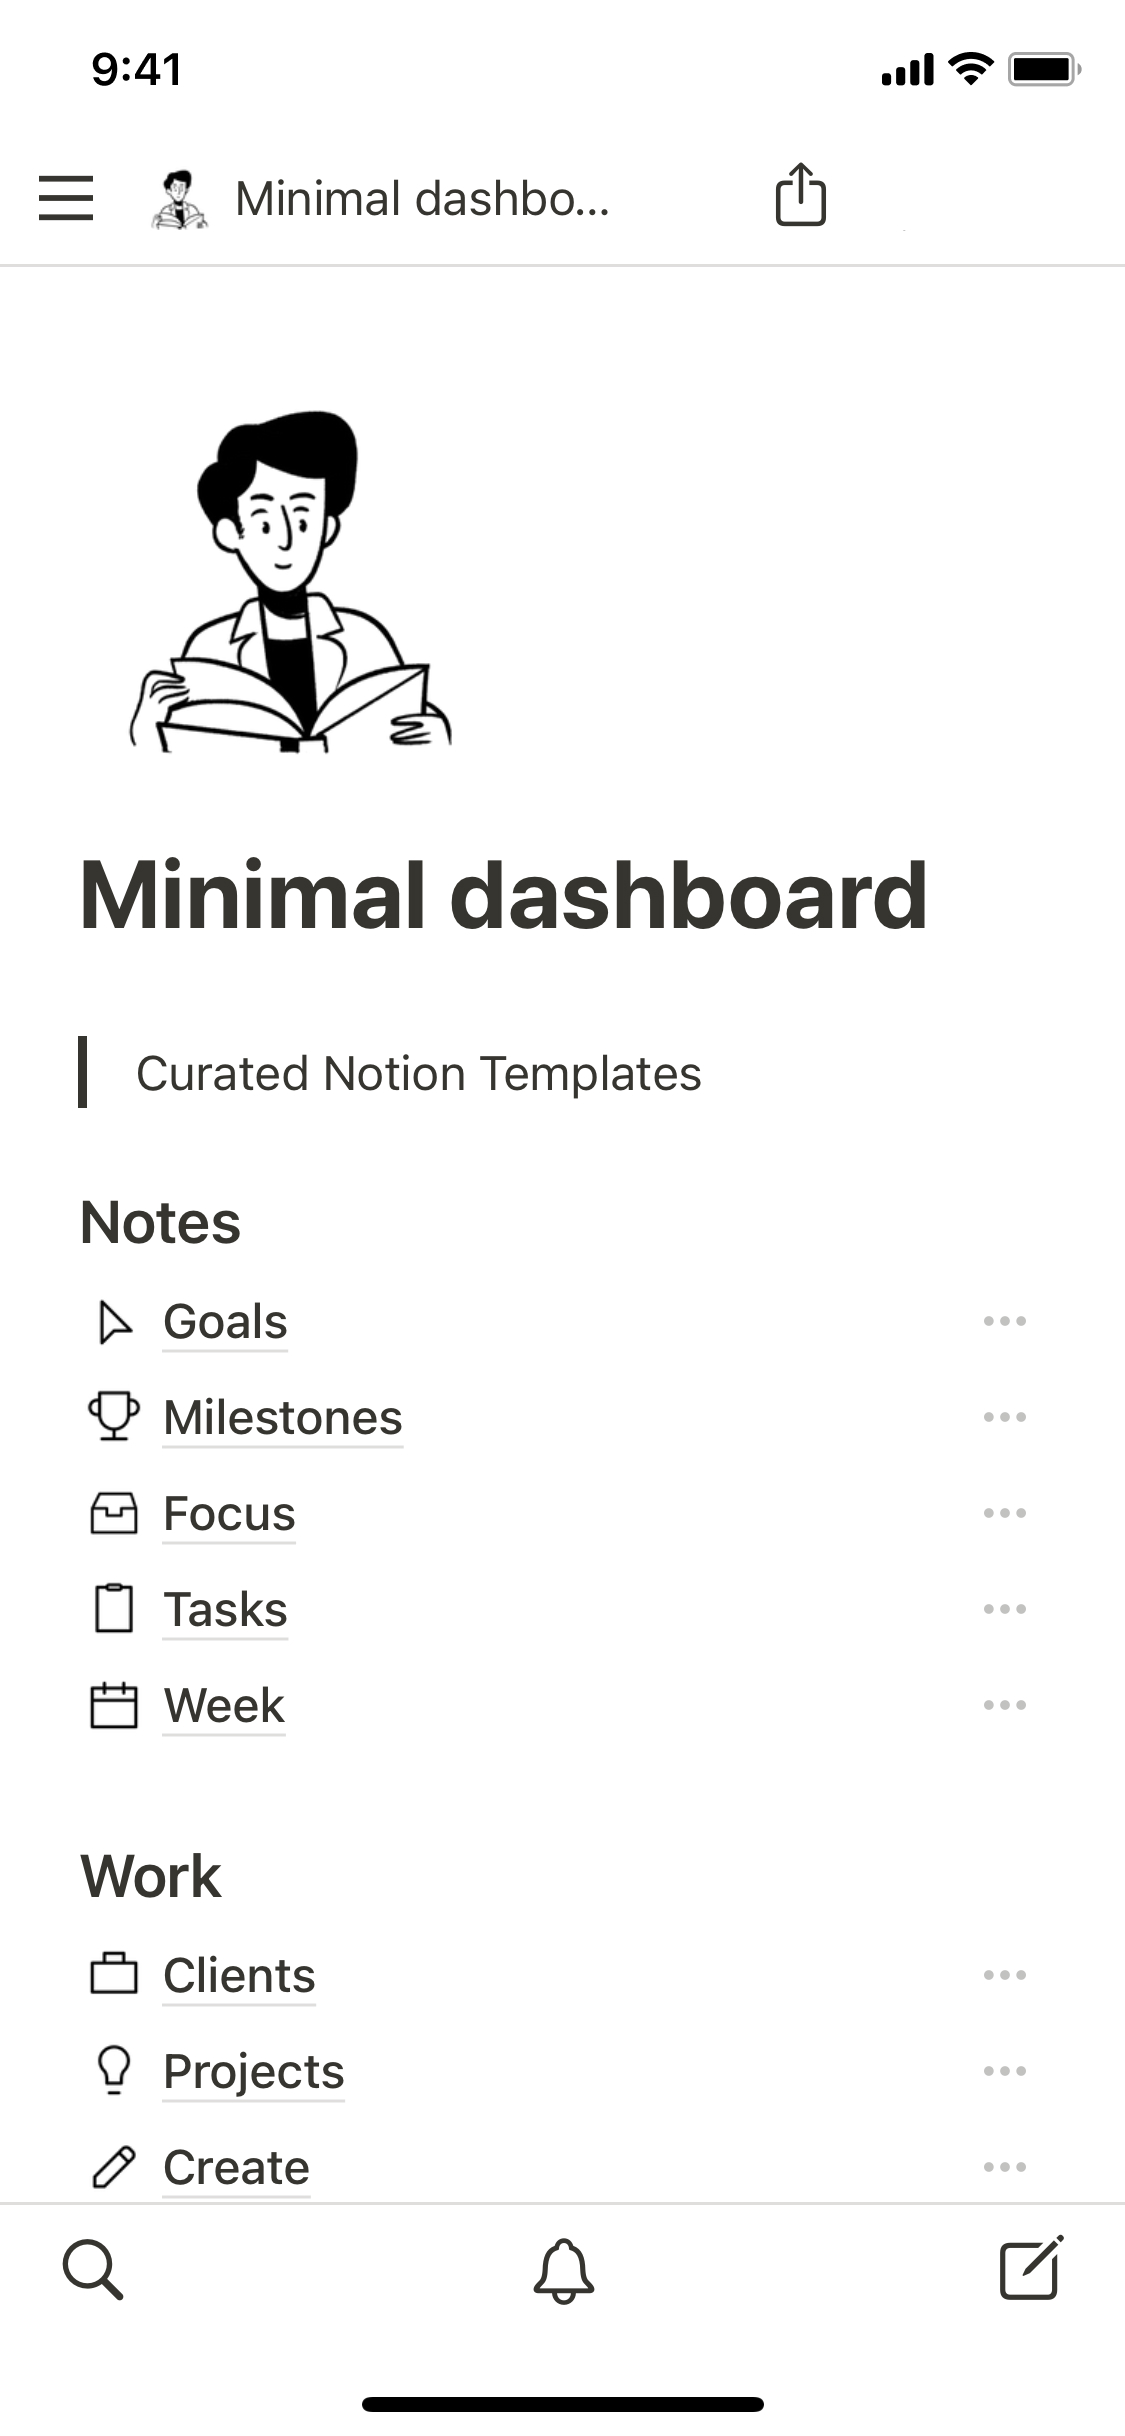 The mobile image for the Minimal dashboard template